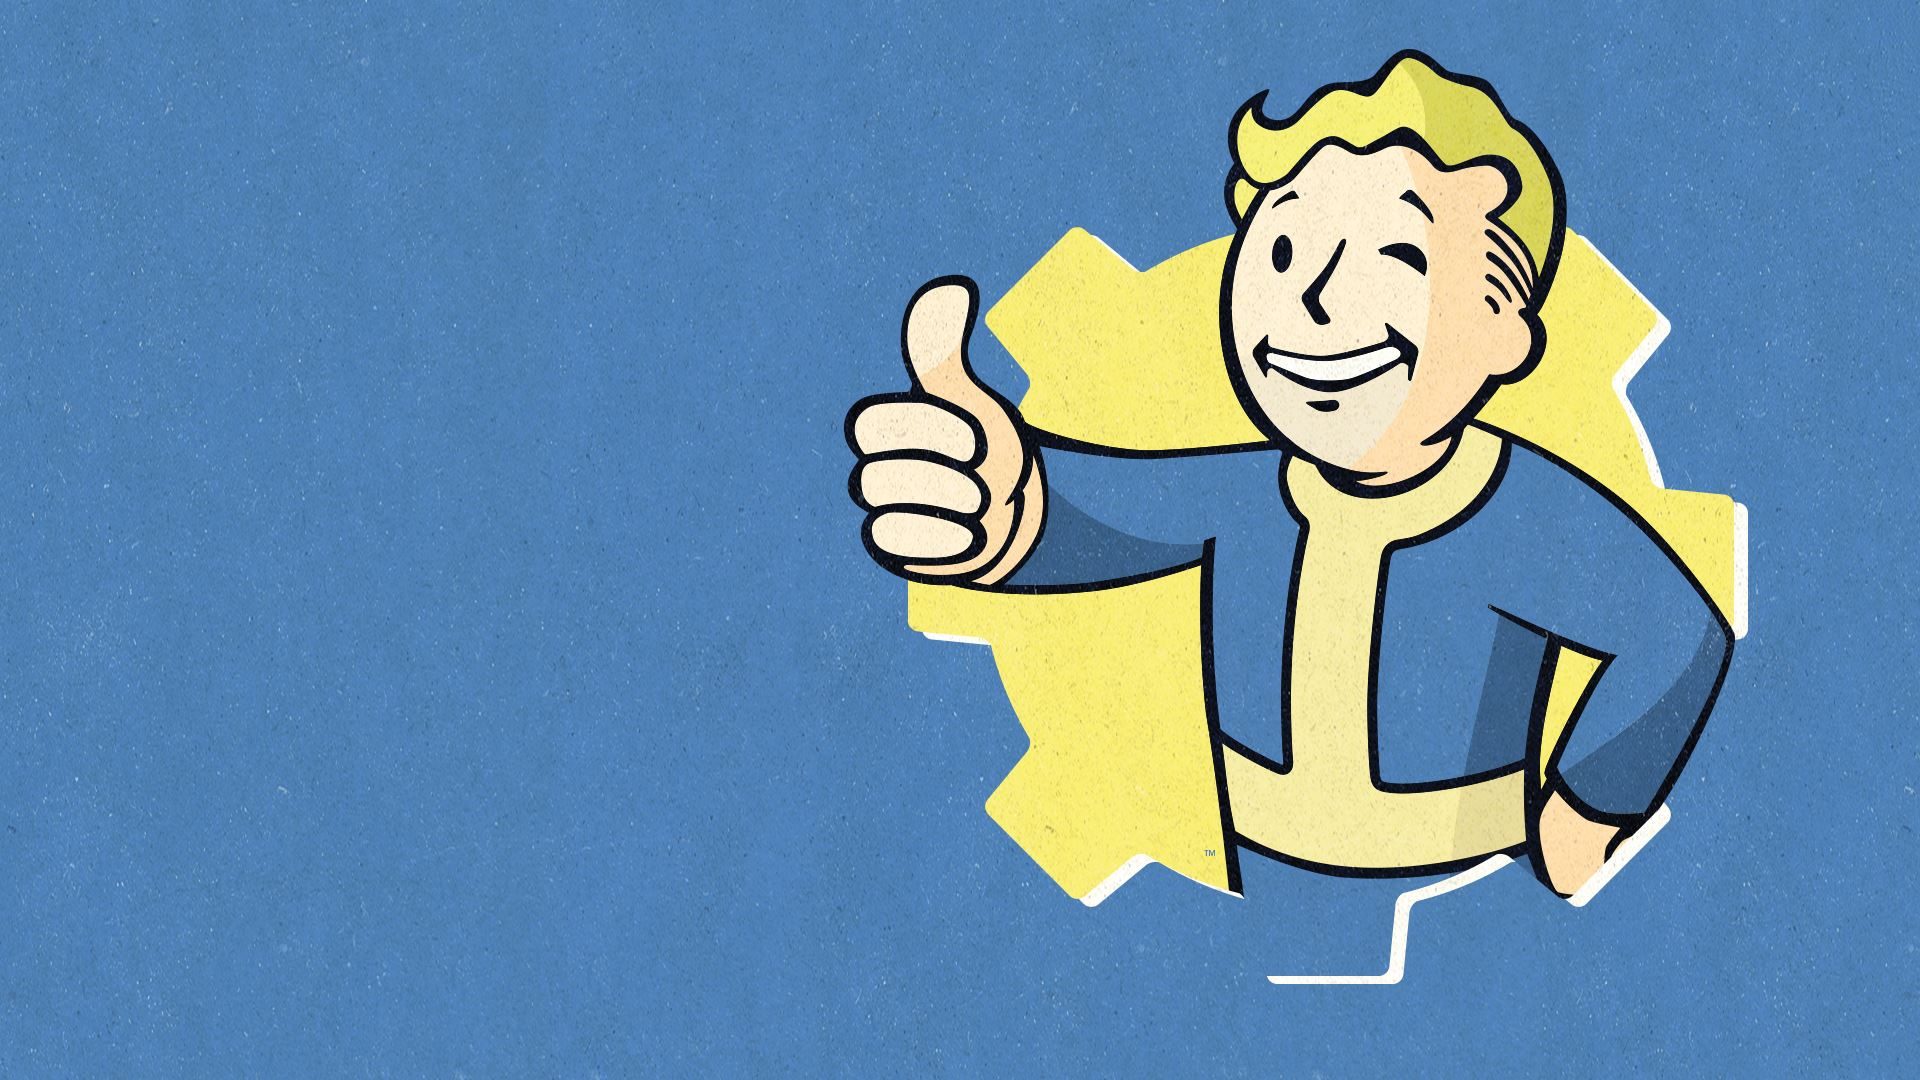 Xbox-serie met Fallout-thema